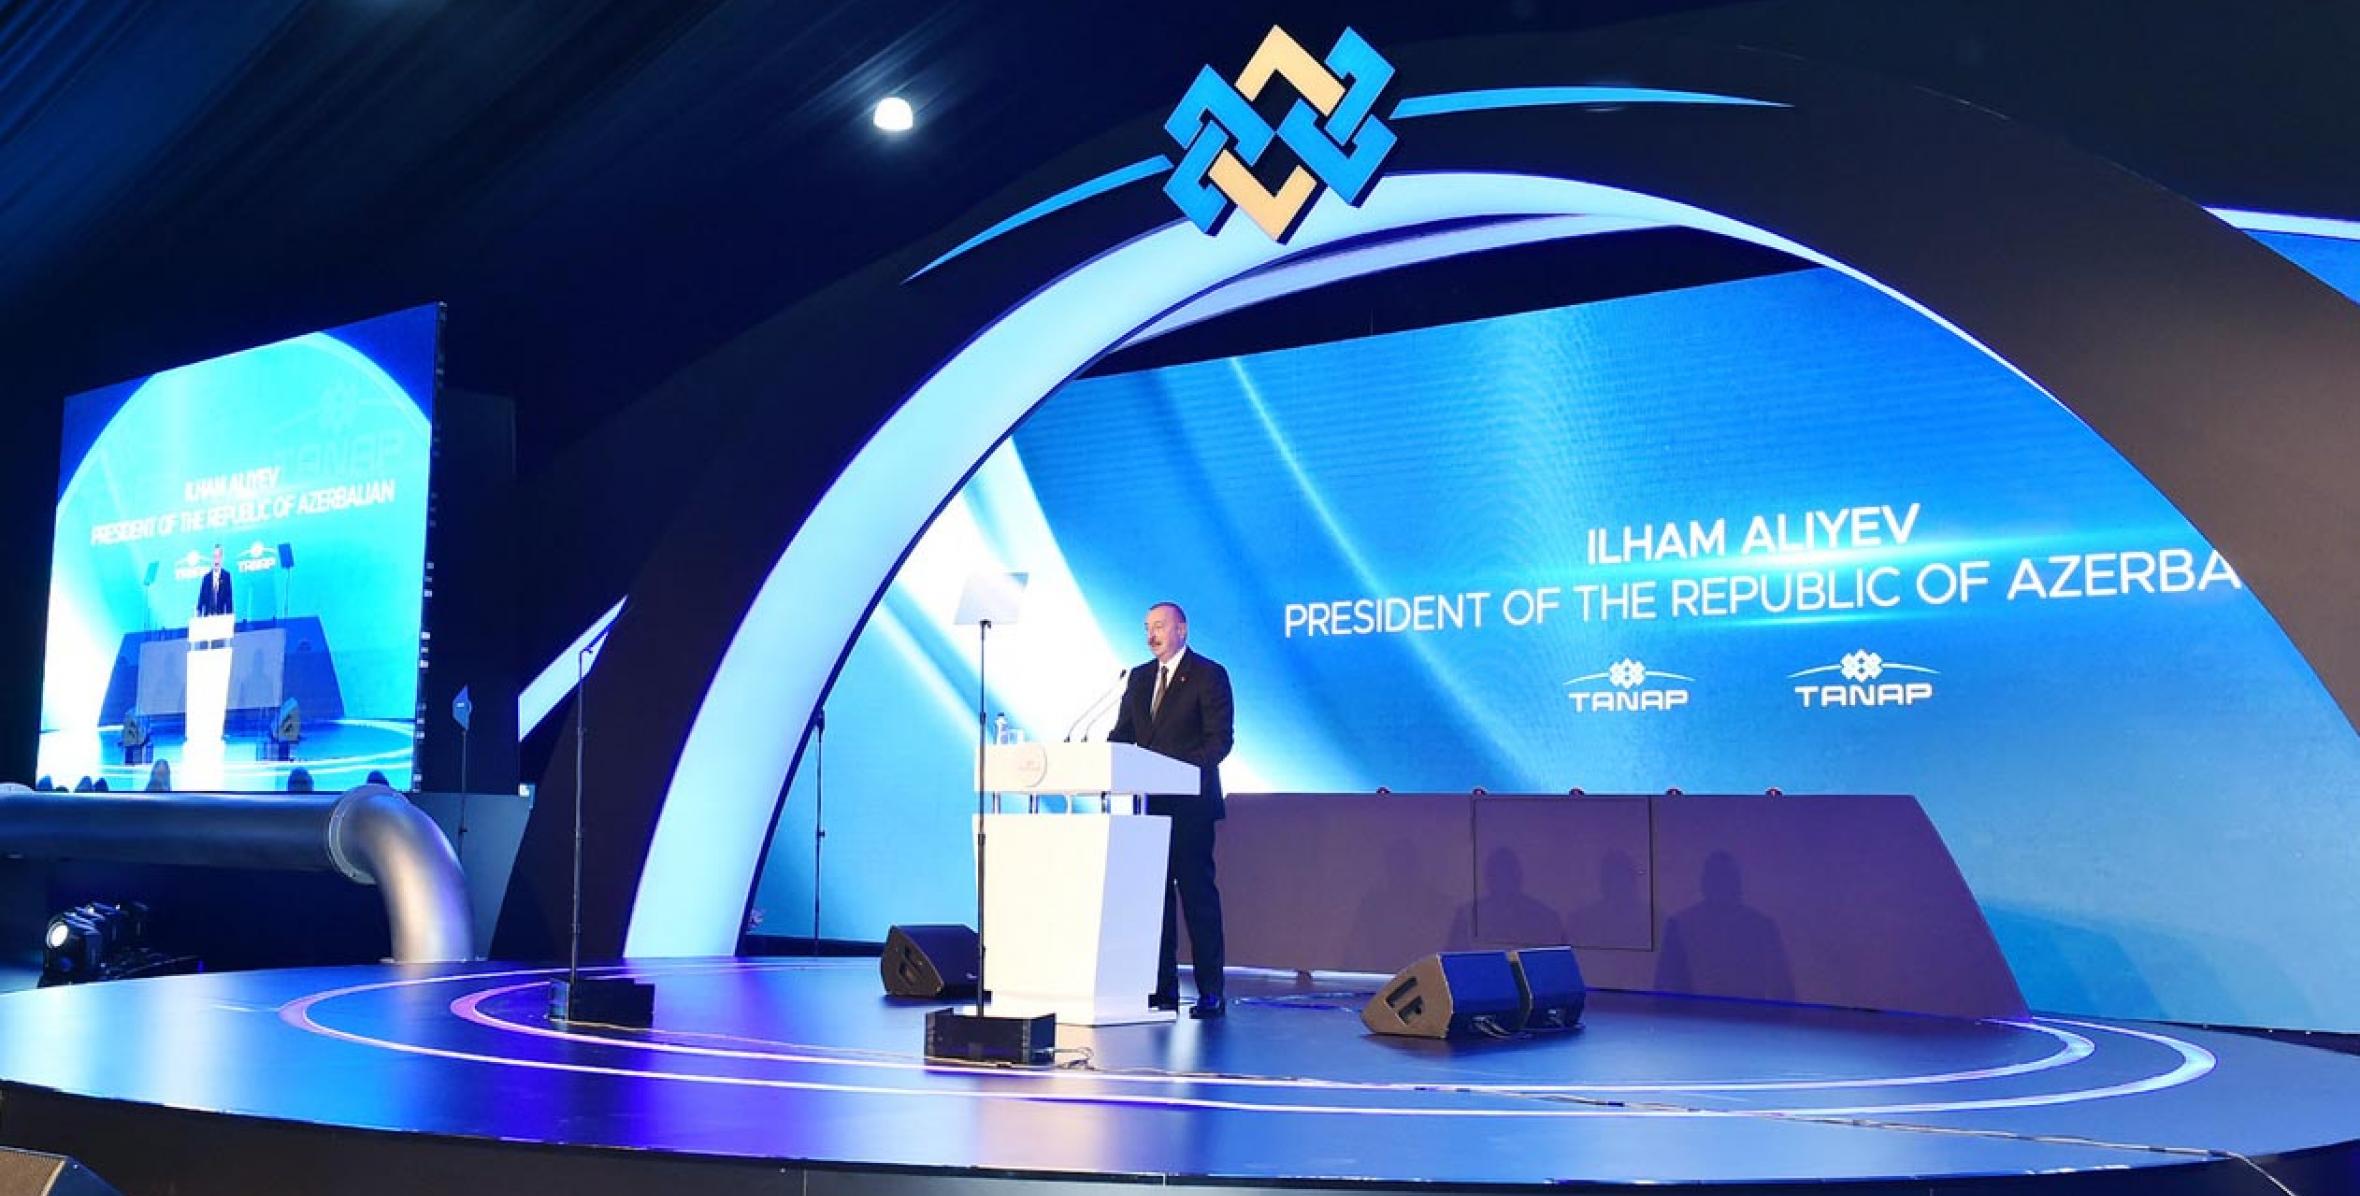 Speech by Ilham Aliyev at the TANAP-Europe connection opening ceremony